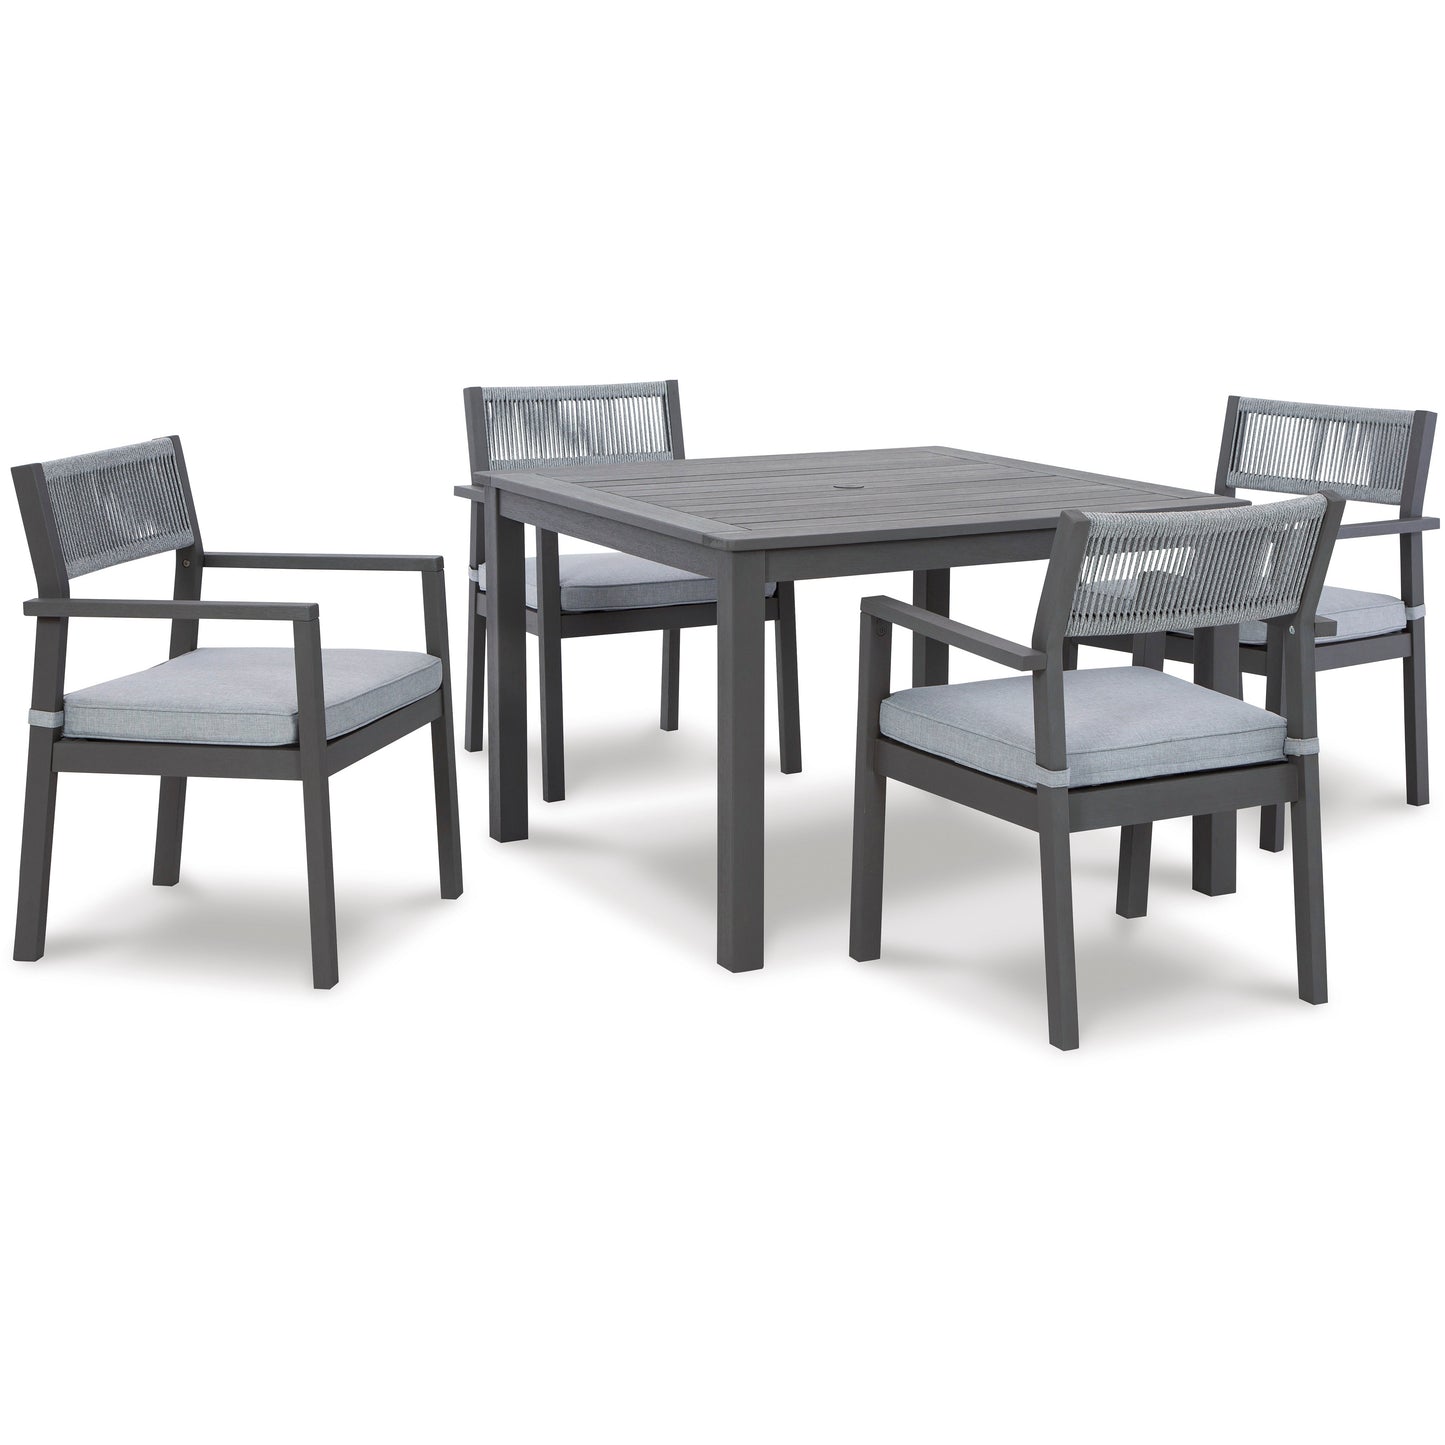 EDEN TOWN OUTDOOR DINING TABLE & 4 CHAIRS